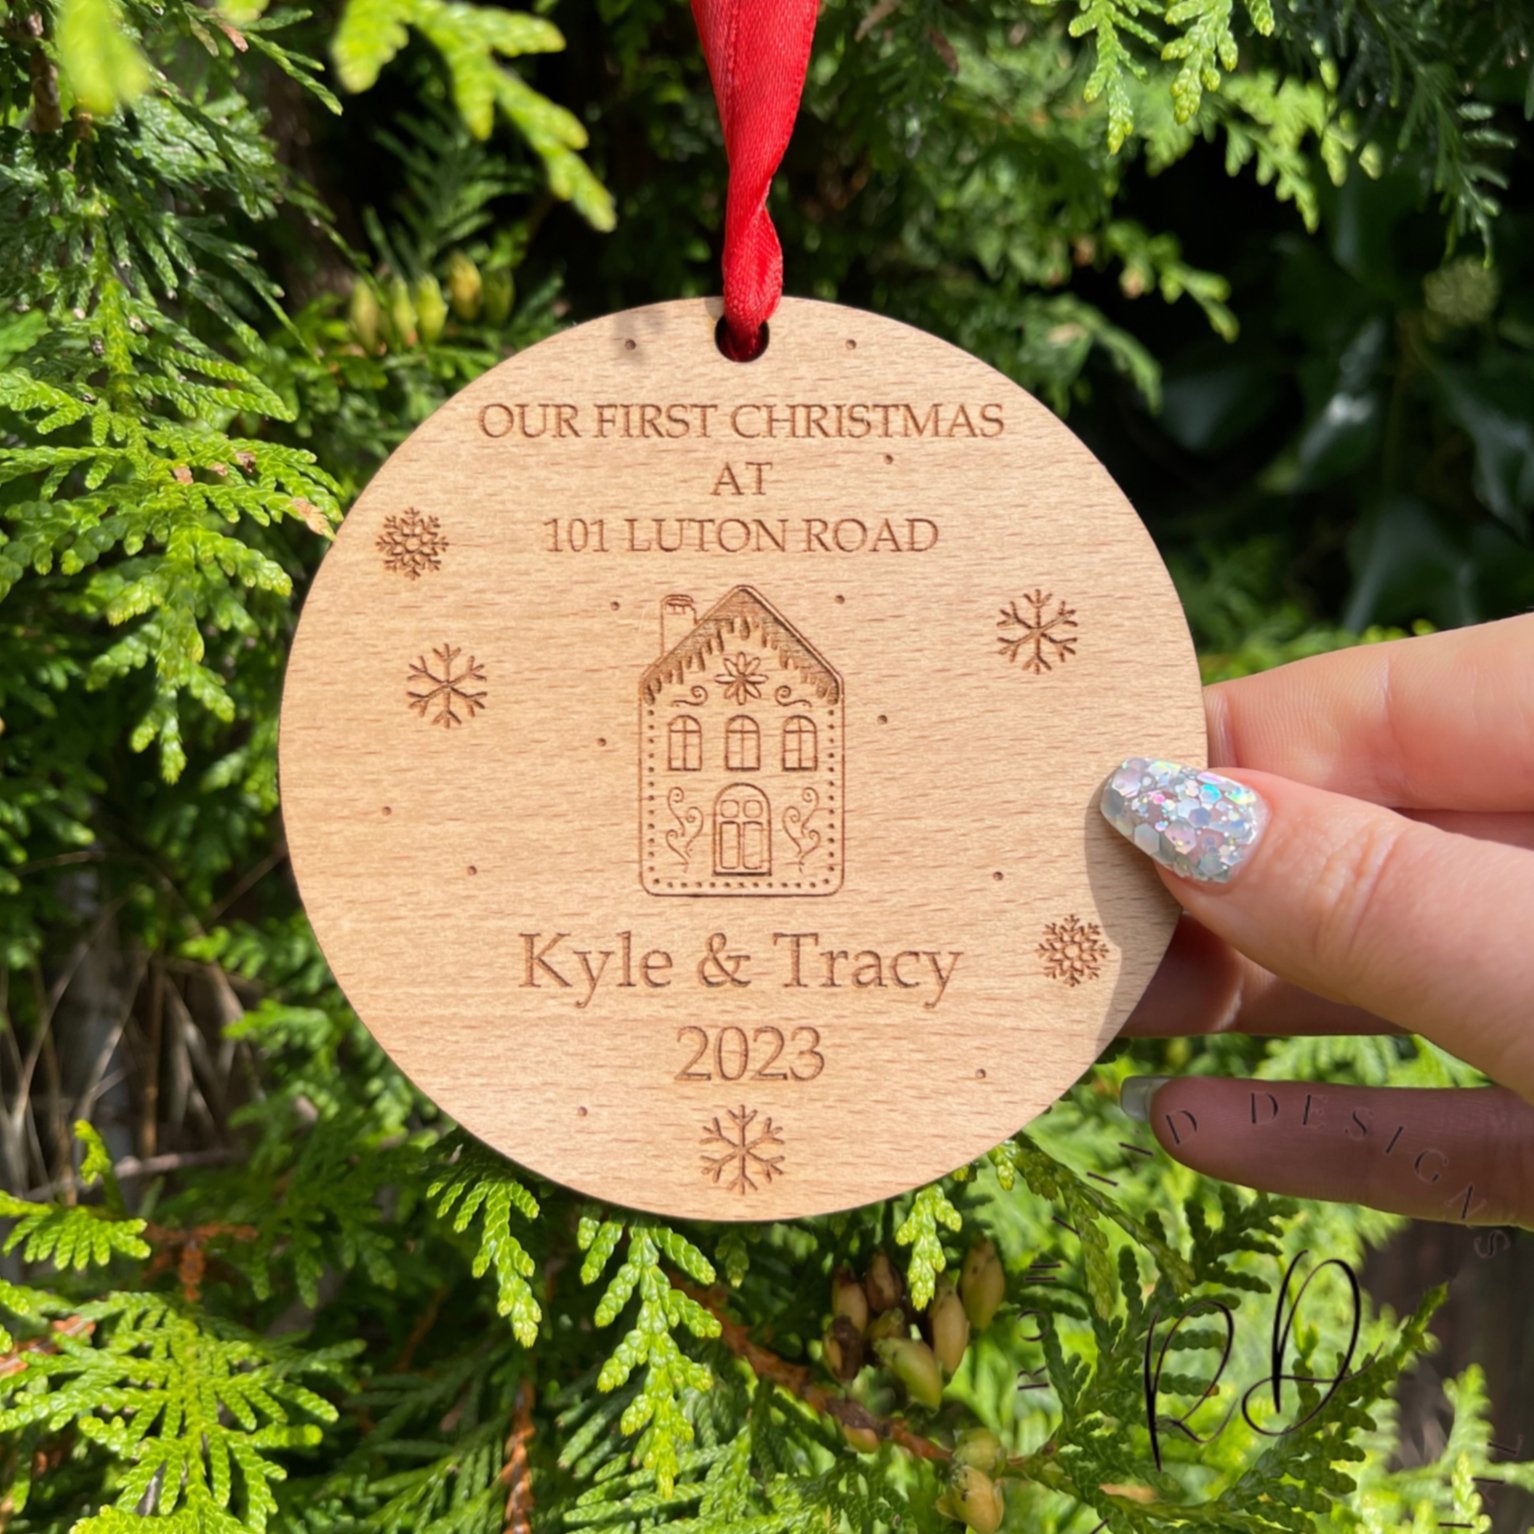 Capture the magic of your first home Christmas with our Personalized First Home Christmas Ornament. Customize it with your home's name and street, the couple's names, and the year. This 100mm x 100mm ornament is beautifully crafted from 4mm beech veneer and includes a festive red ribbon. The perfect holiday gift to cherish those special memories.